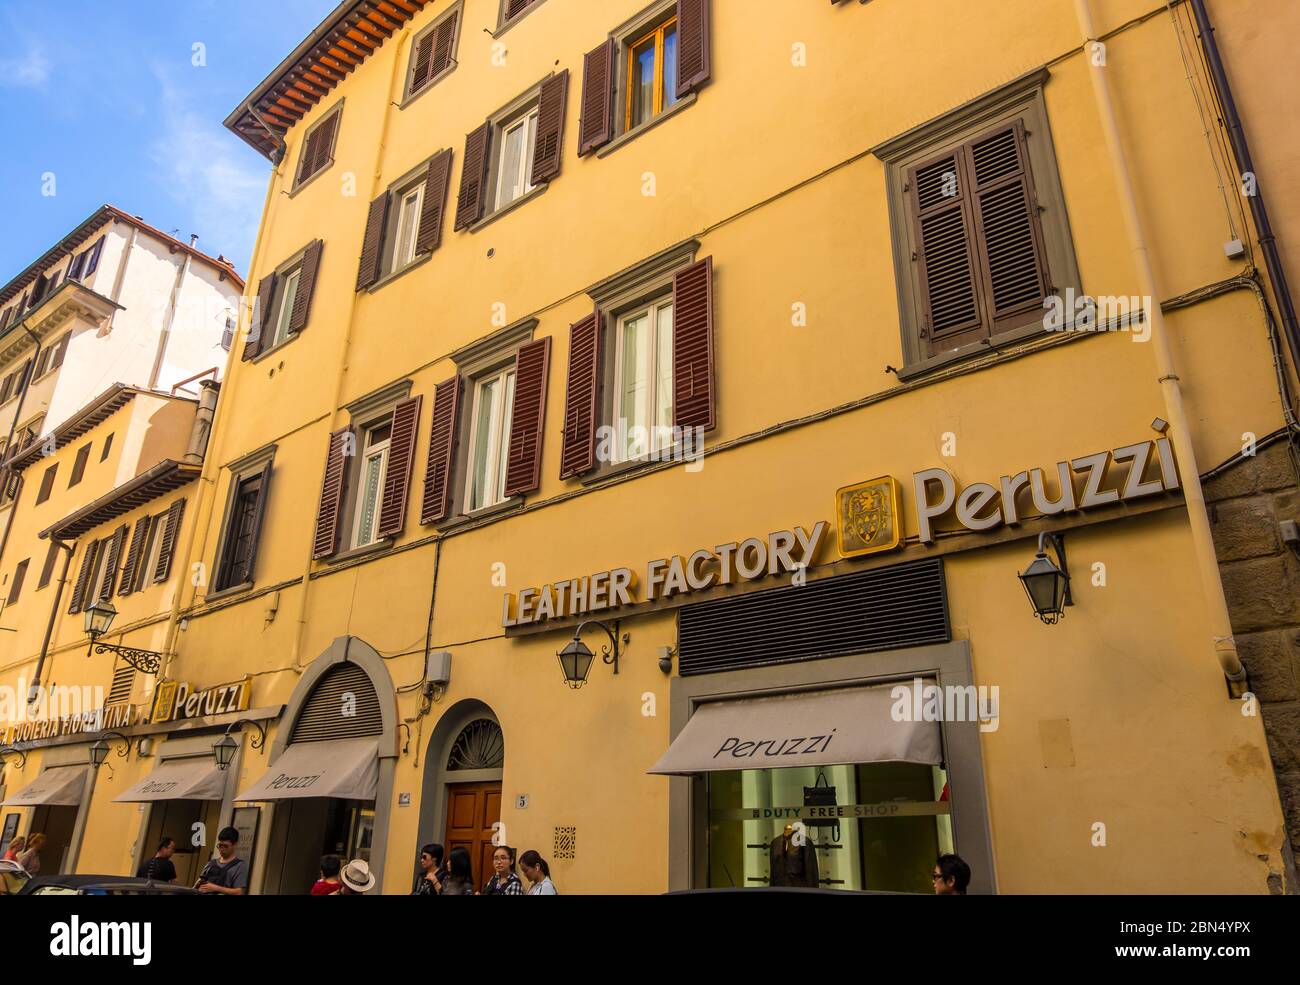 Florence, Italy - August 16, 2019: Facade of the famous clothing store Peruzzi Leather Factory in the historic centre of Florence, Tuscany, Italy Stock Photo